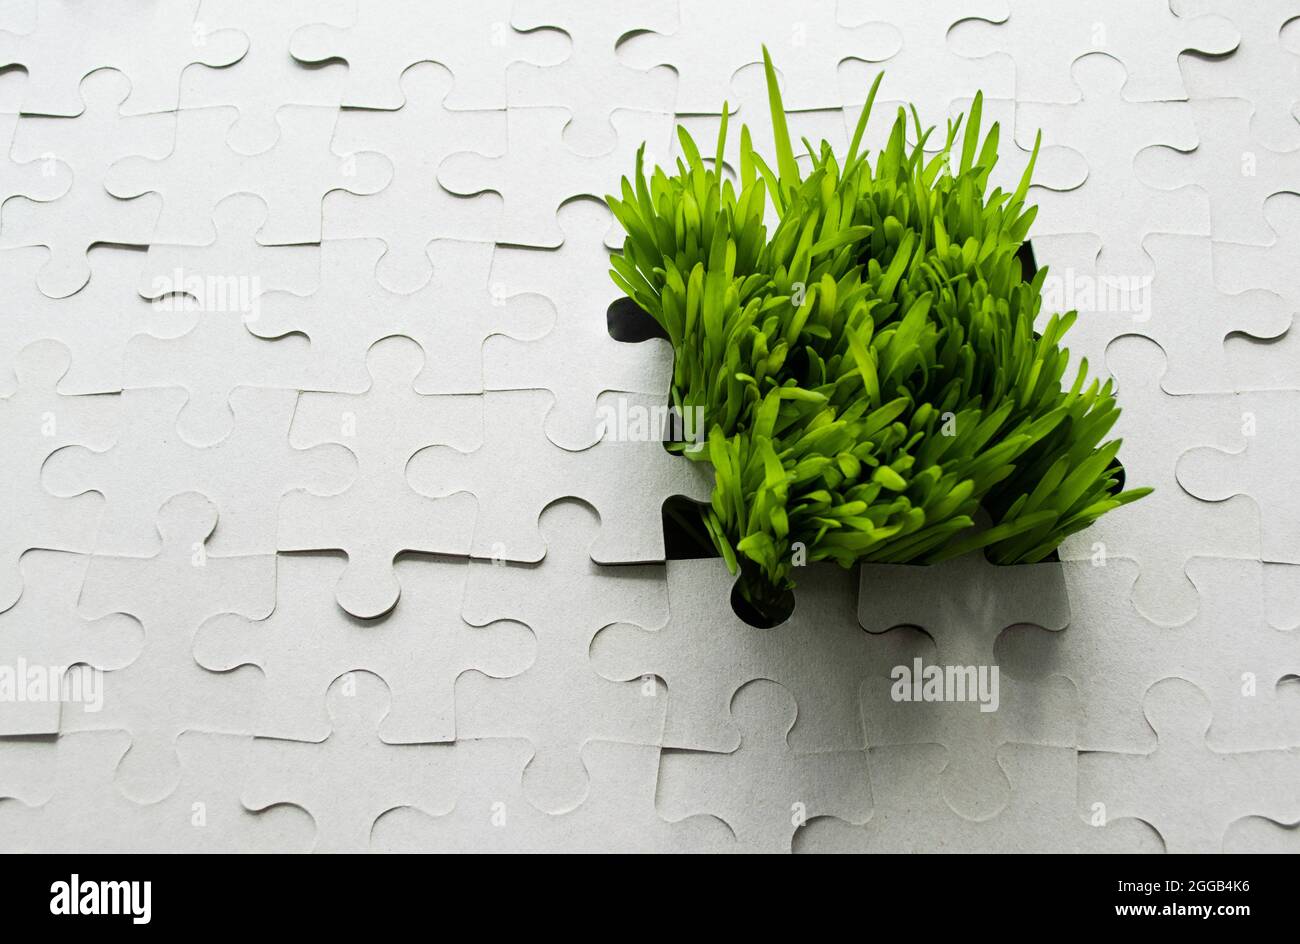 Background of the cardboard puzzle without pattern. Bright green grass grows through the hole, as if breaking through obstacles. Copy space. Stock Photo